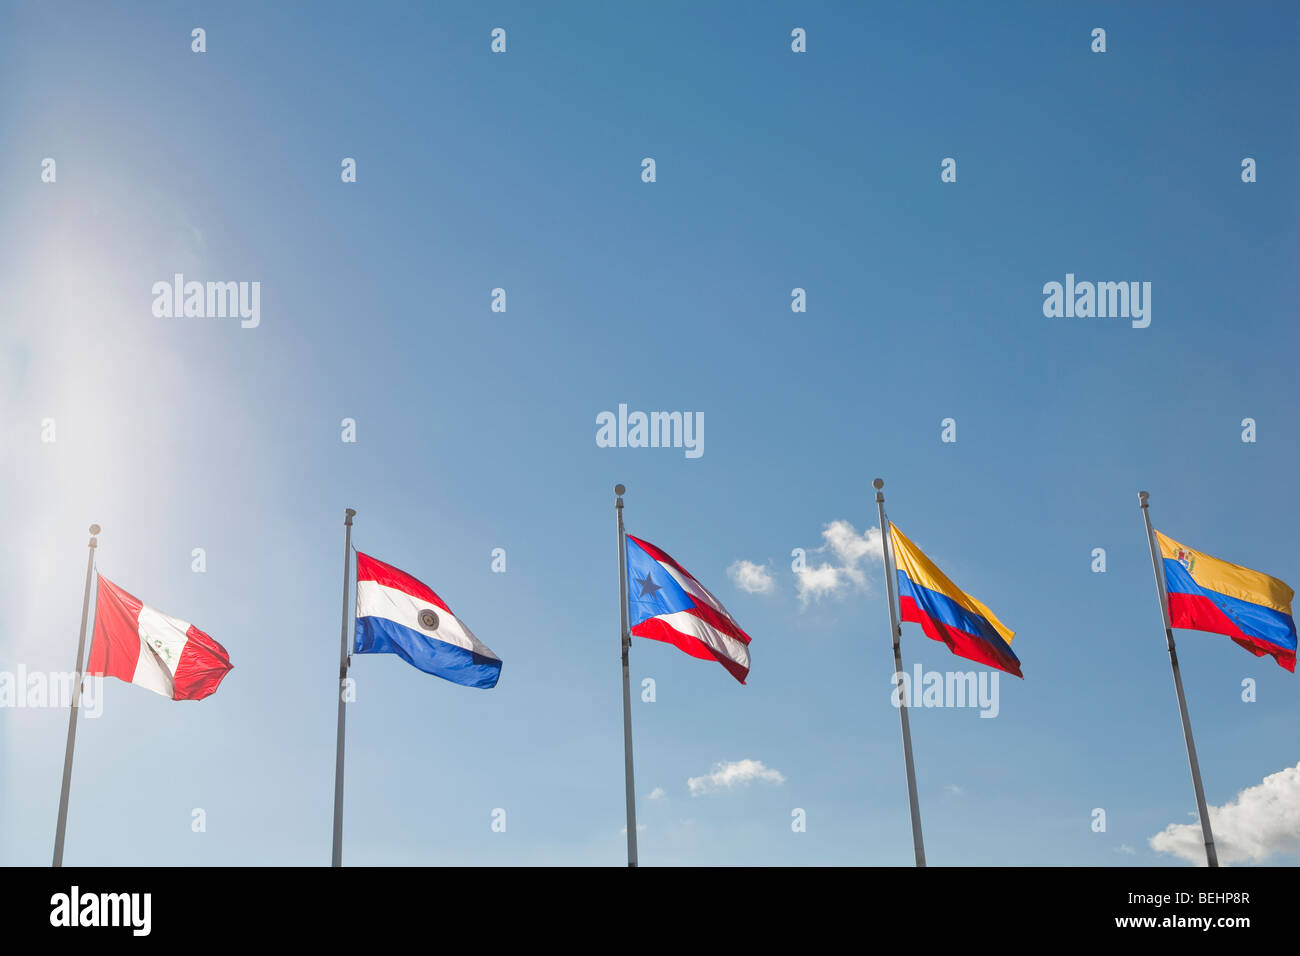 Low angle view of various national flags fluttering, Miami, Florida, USA Stock Photo